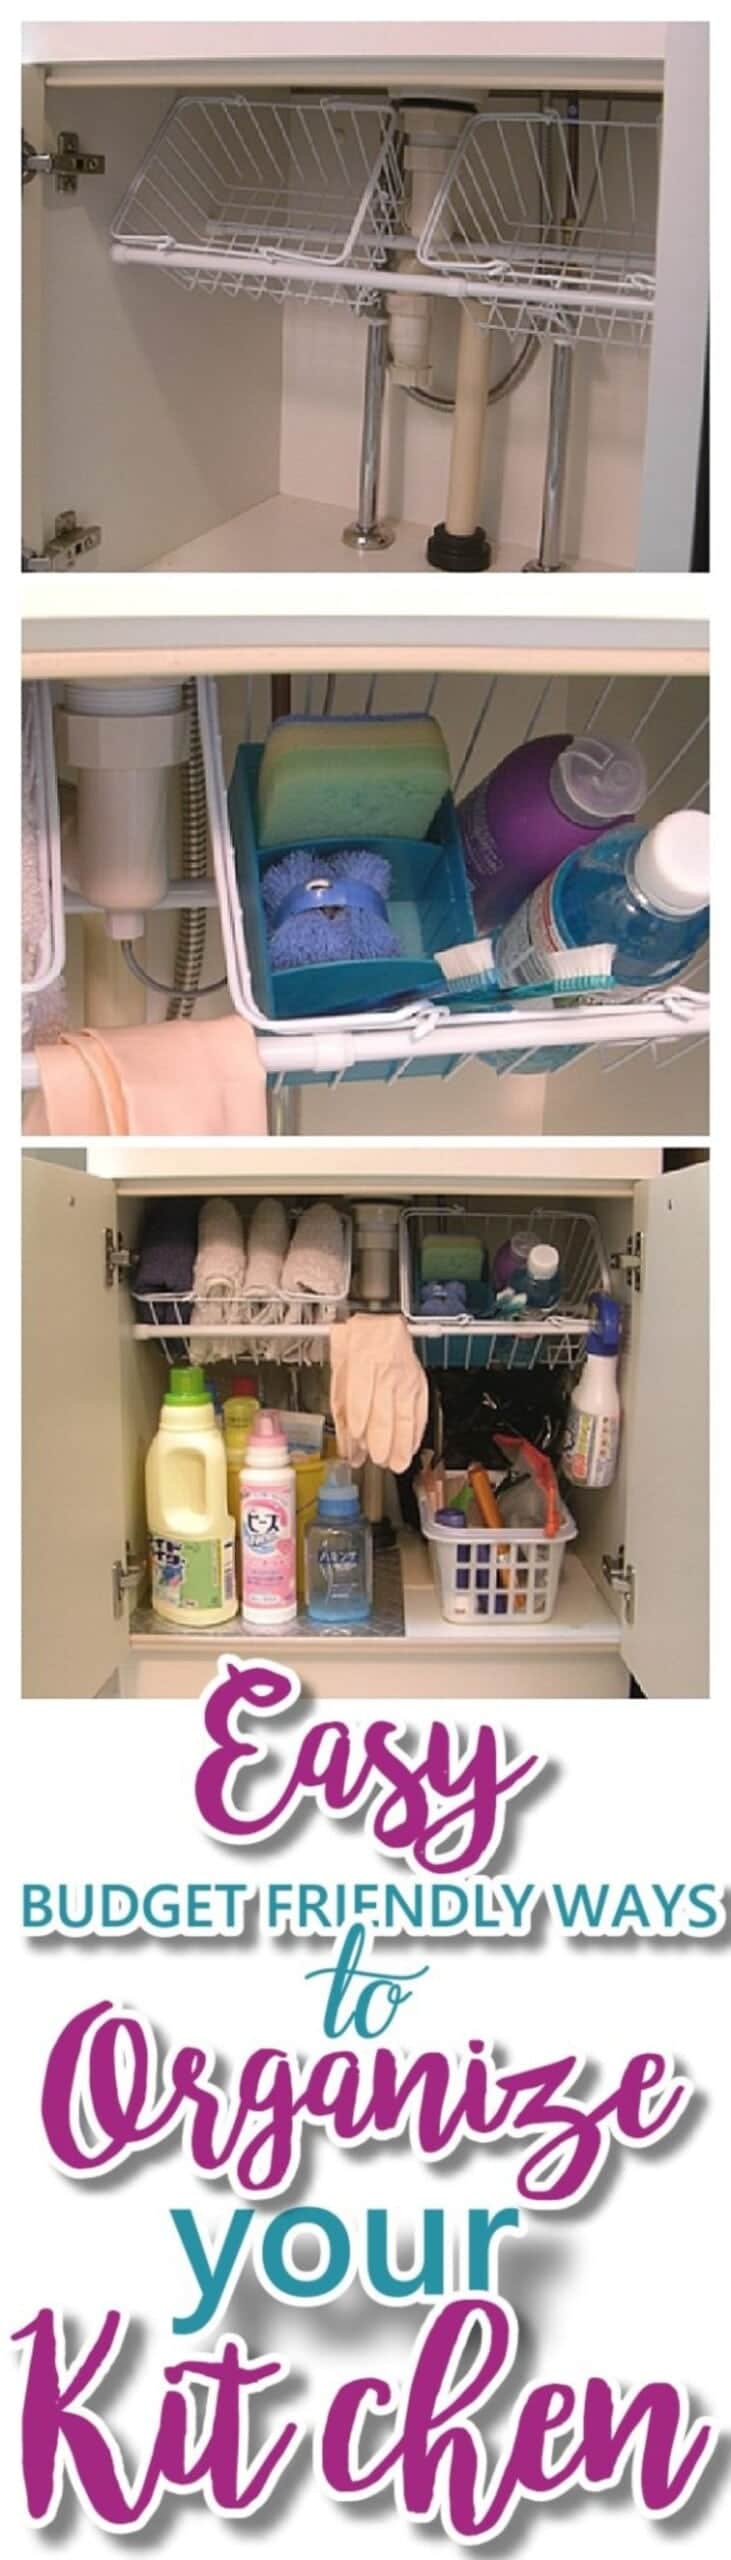 37+ Ideas Model Kitchen Cabinets That is Simple - Neat Fast  Under the  sink organization, Kitchen organization diy, Kitchen cabinet organization